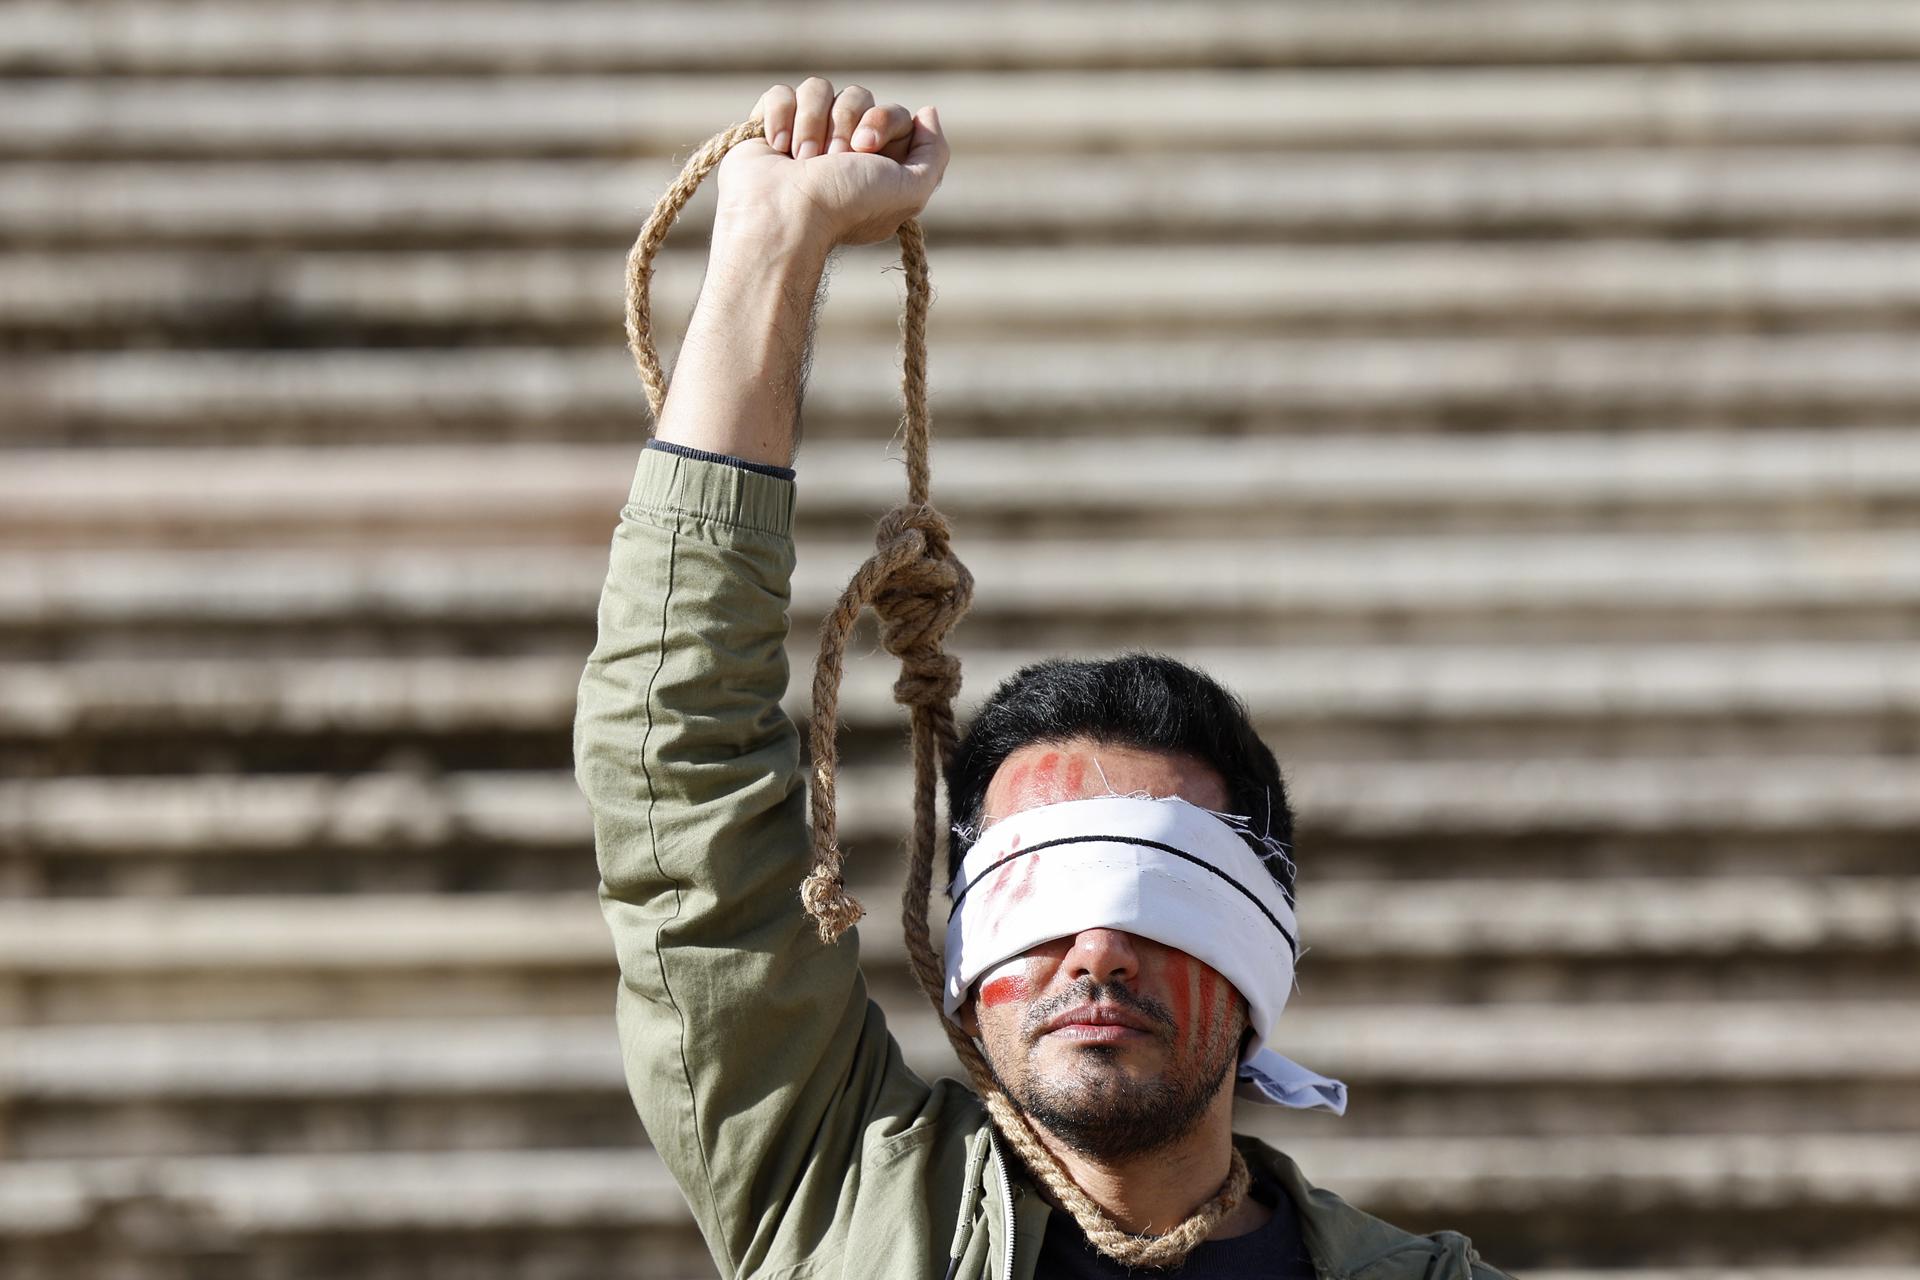 A demonstrator from the Iranian Portuguese community protests in front of the Parliament building following Iran's sentencing to death and public execution of two young demonstrators, Mohsen Shekari and Majidreza Rahnavard, for participating in demonstrations against the regime, in Lisbon, Portugal, 16 December 2022. EFE-EPA FILE/ANTONIO PEDRO SANTOS